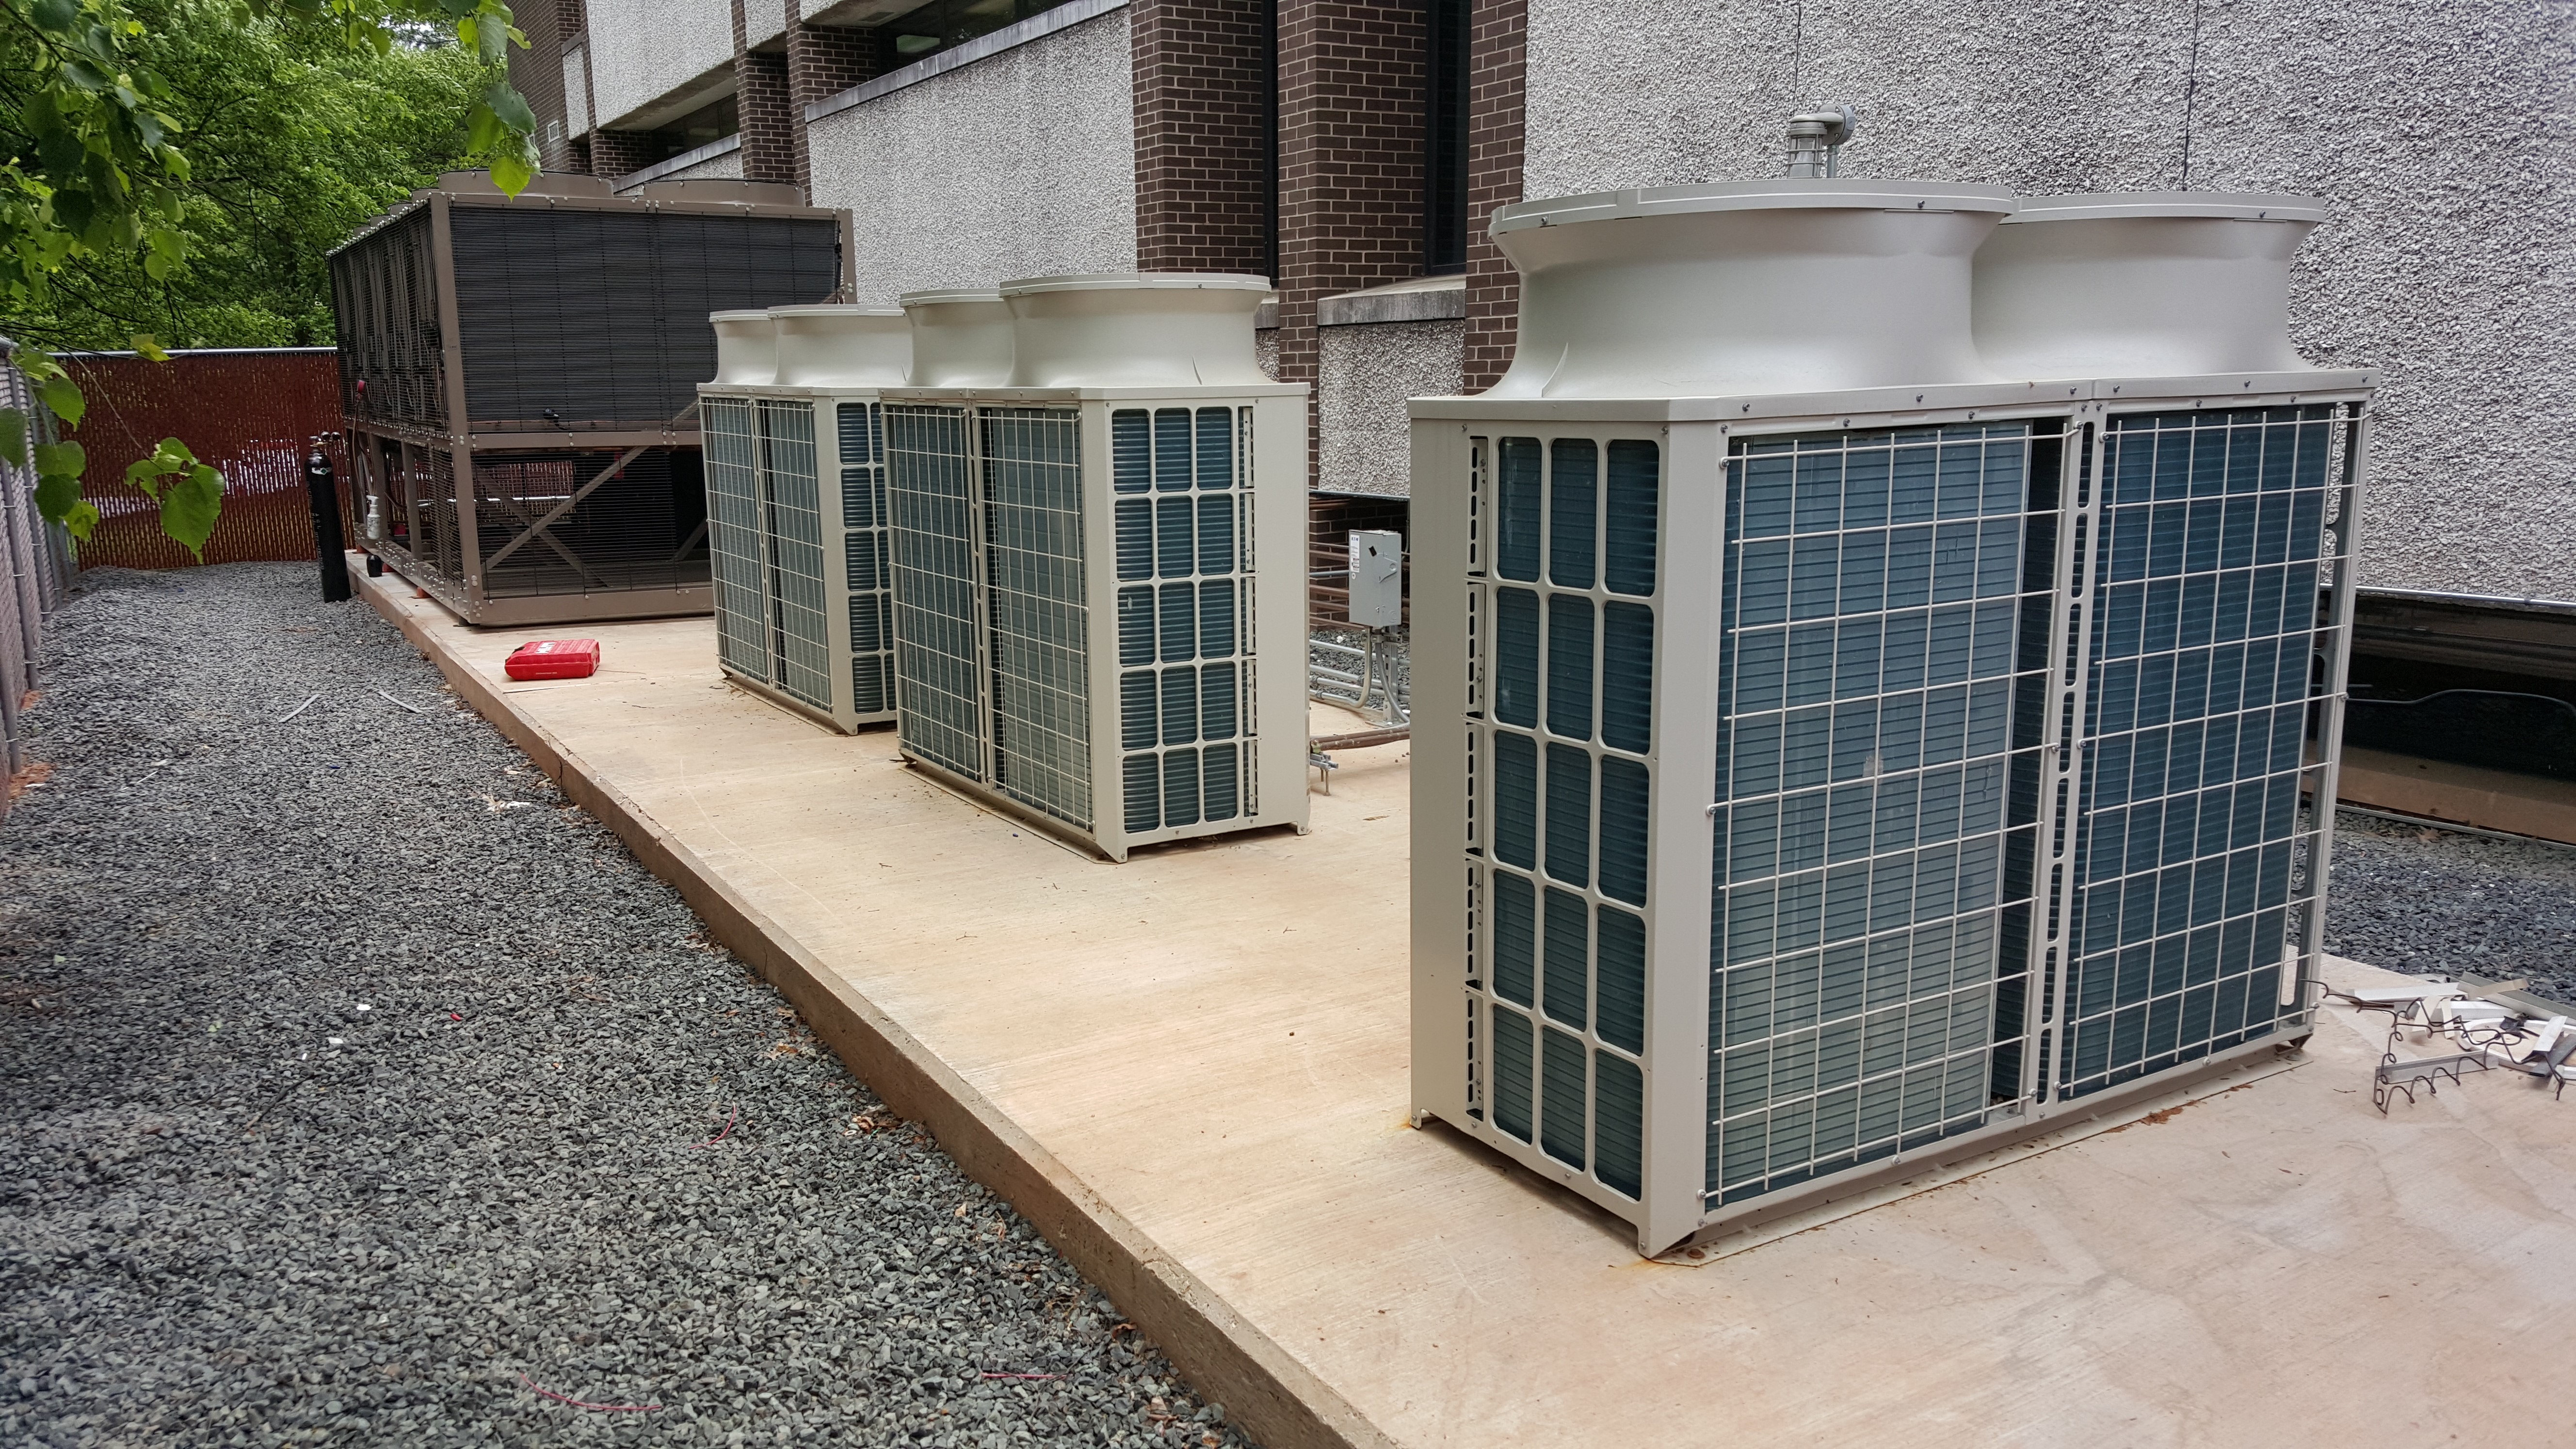 Whitman completed an HVAC upgrade project at Rutgers University's SHRP Building.